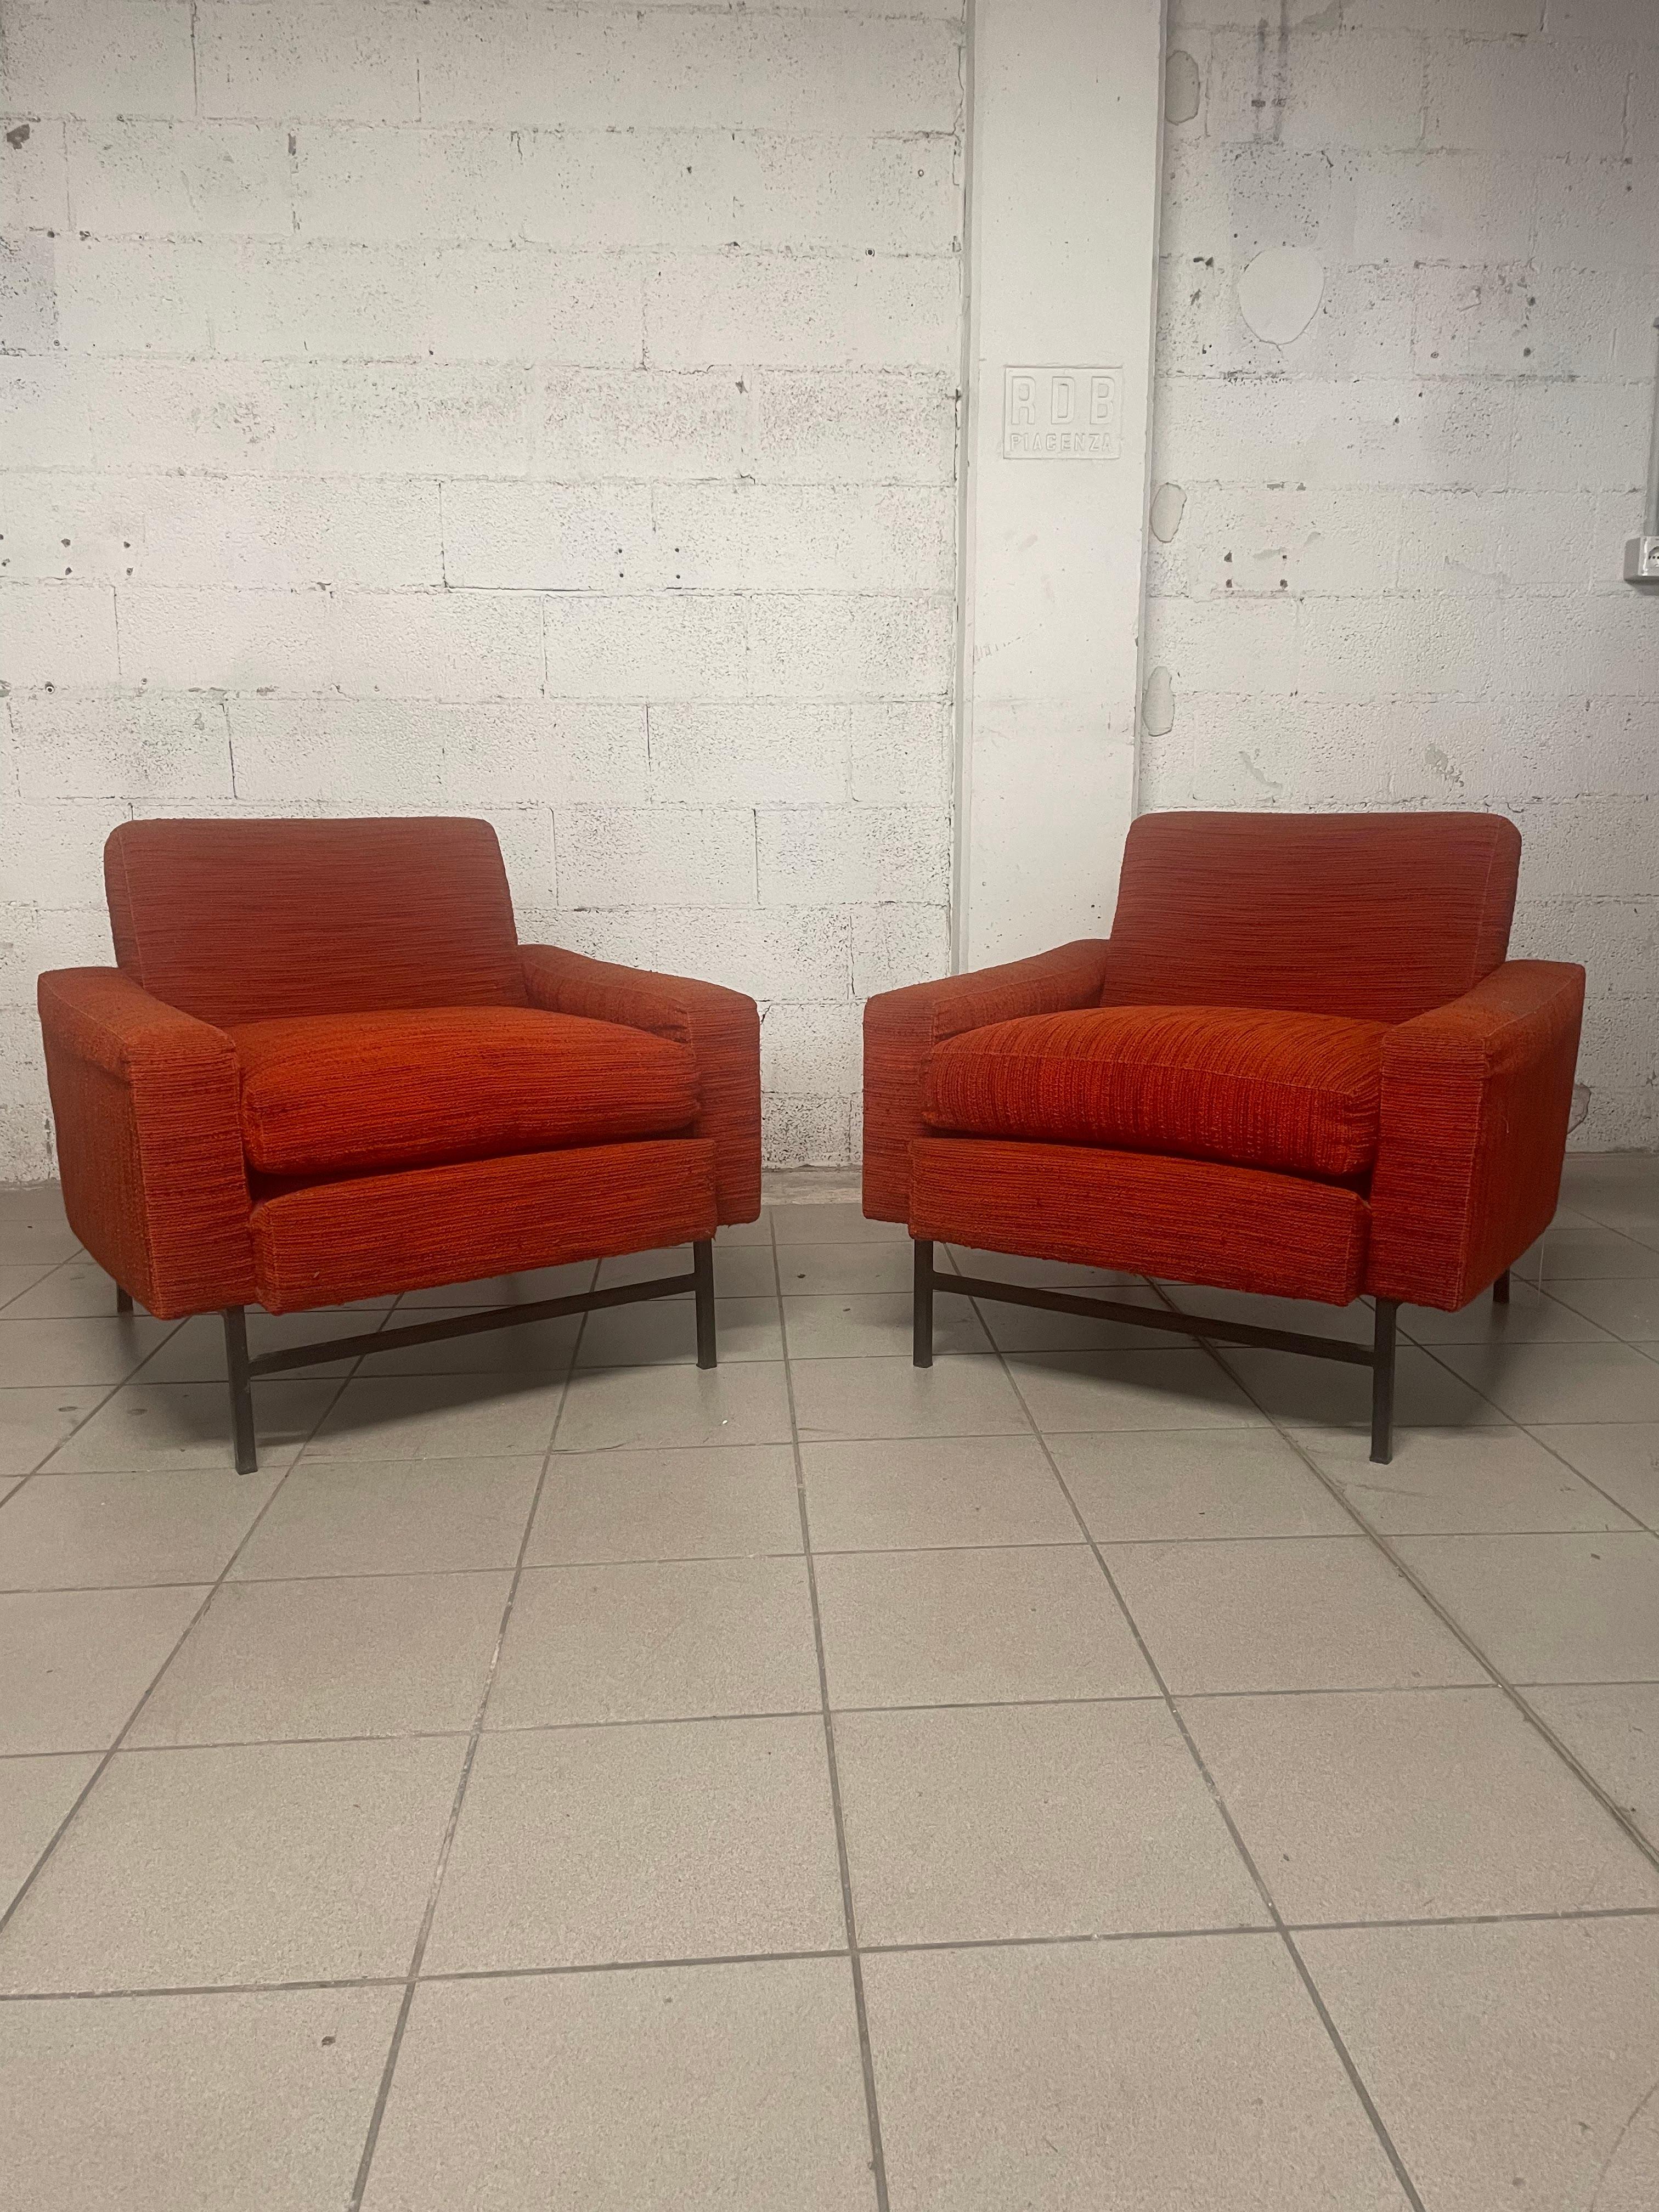 Pair of 1960s armchairs with square tubular iron frame and fabric upholstery still original.
The upholstery is sound, the original cover is in good overall condition.